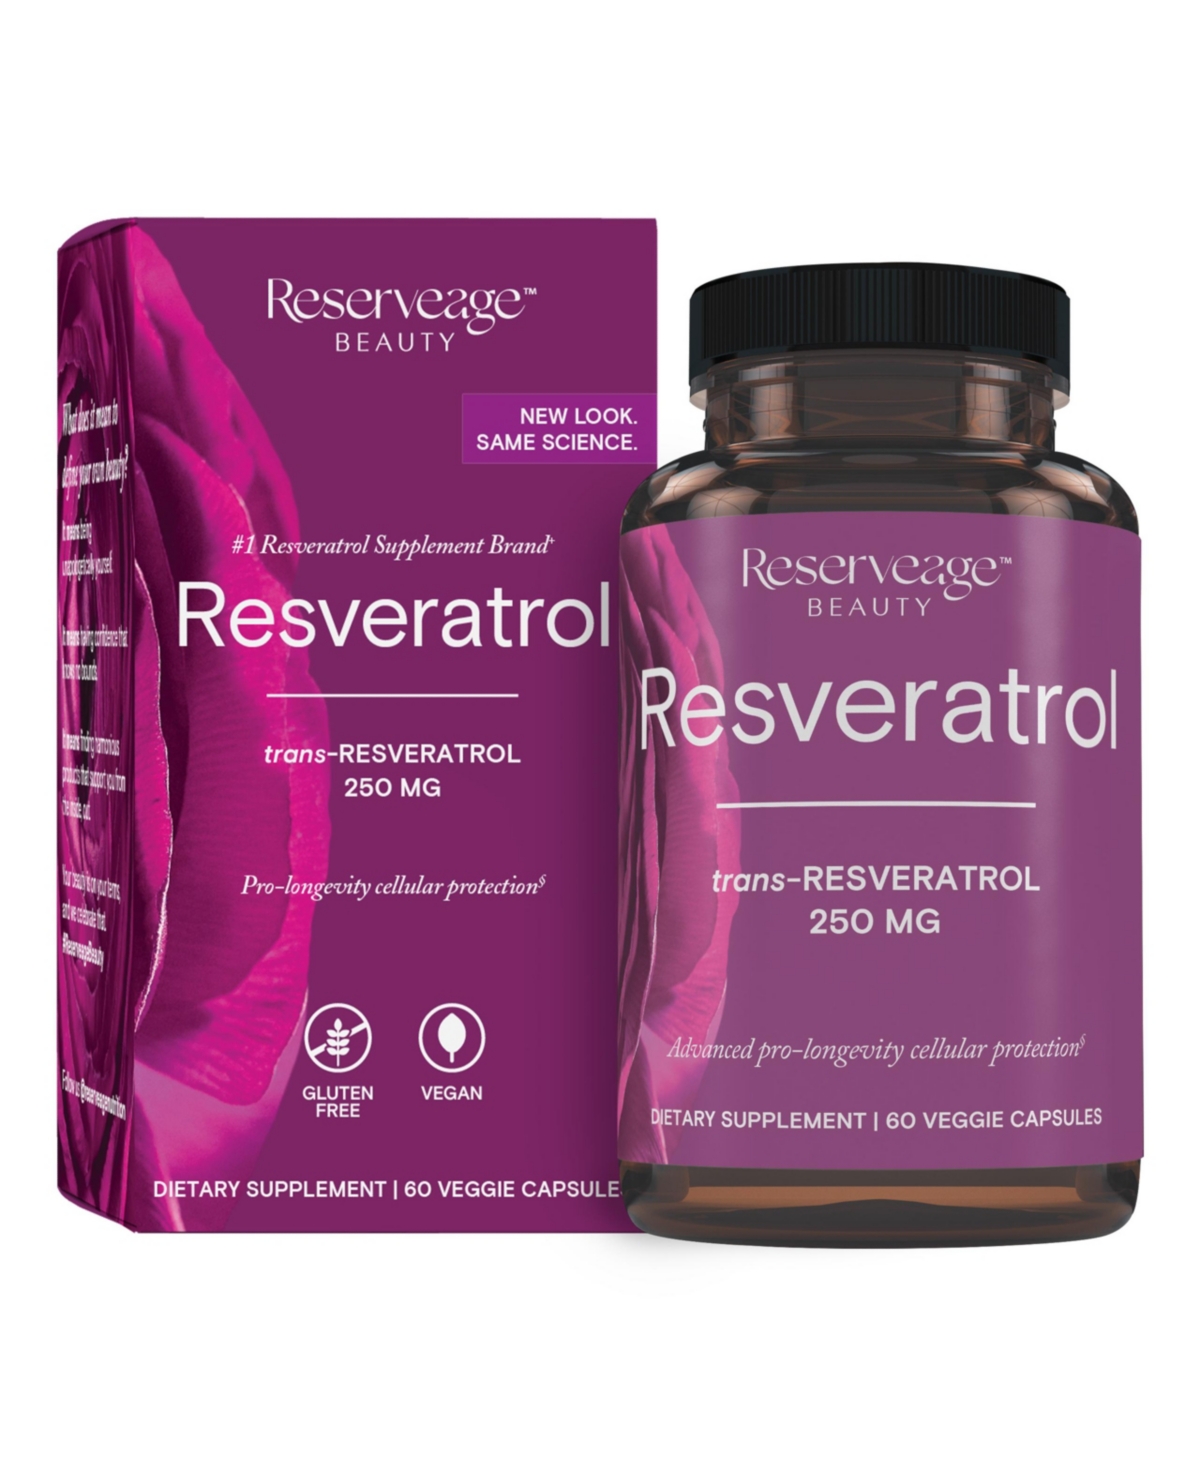 Resveratrol 250 mg, Antioxidant Supplement for Heart and Cellular Health, Supports Healthy Aging, Paleo, Keto, 60 Capsules